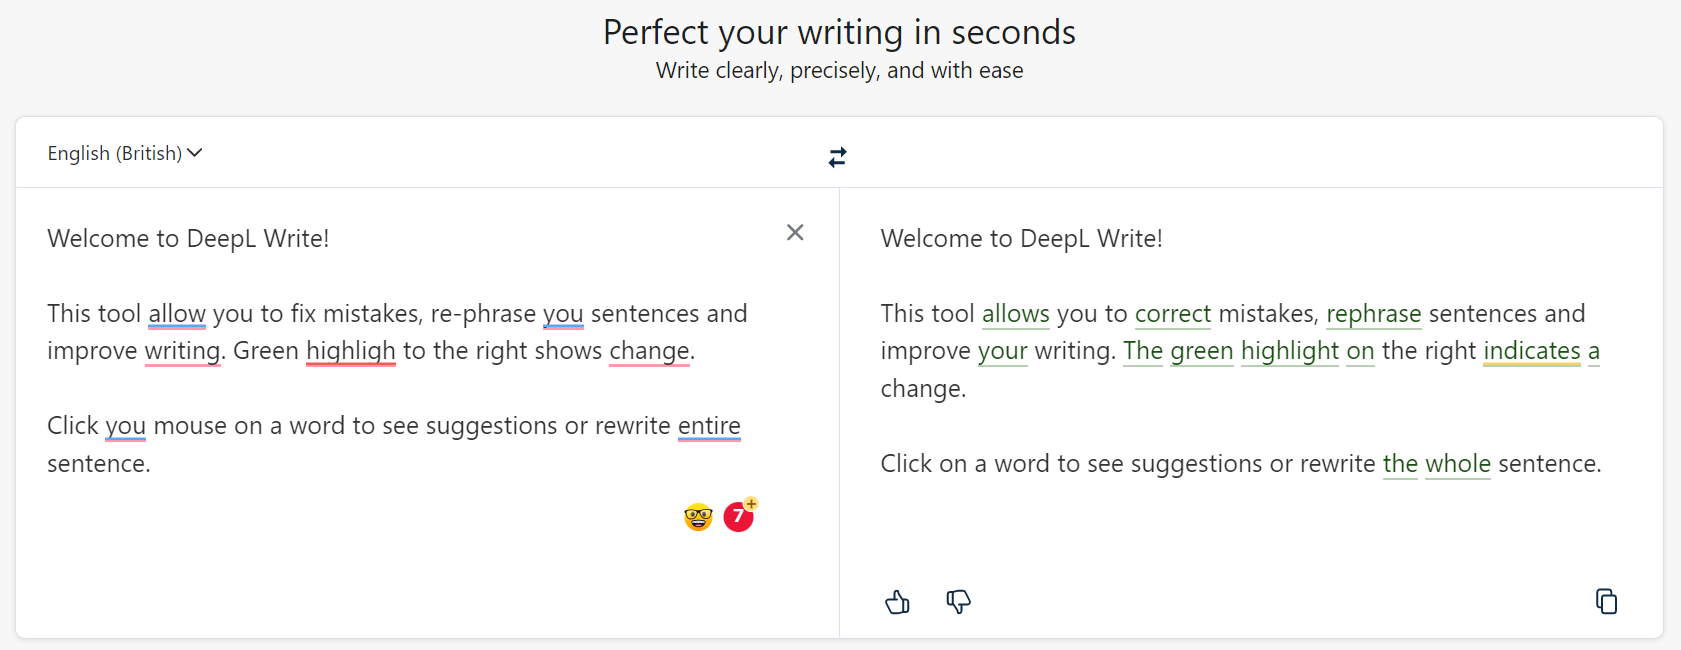 Perfect your writing in seconds